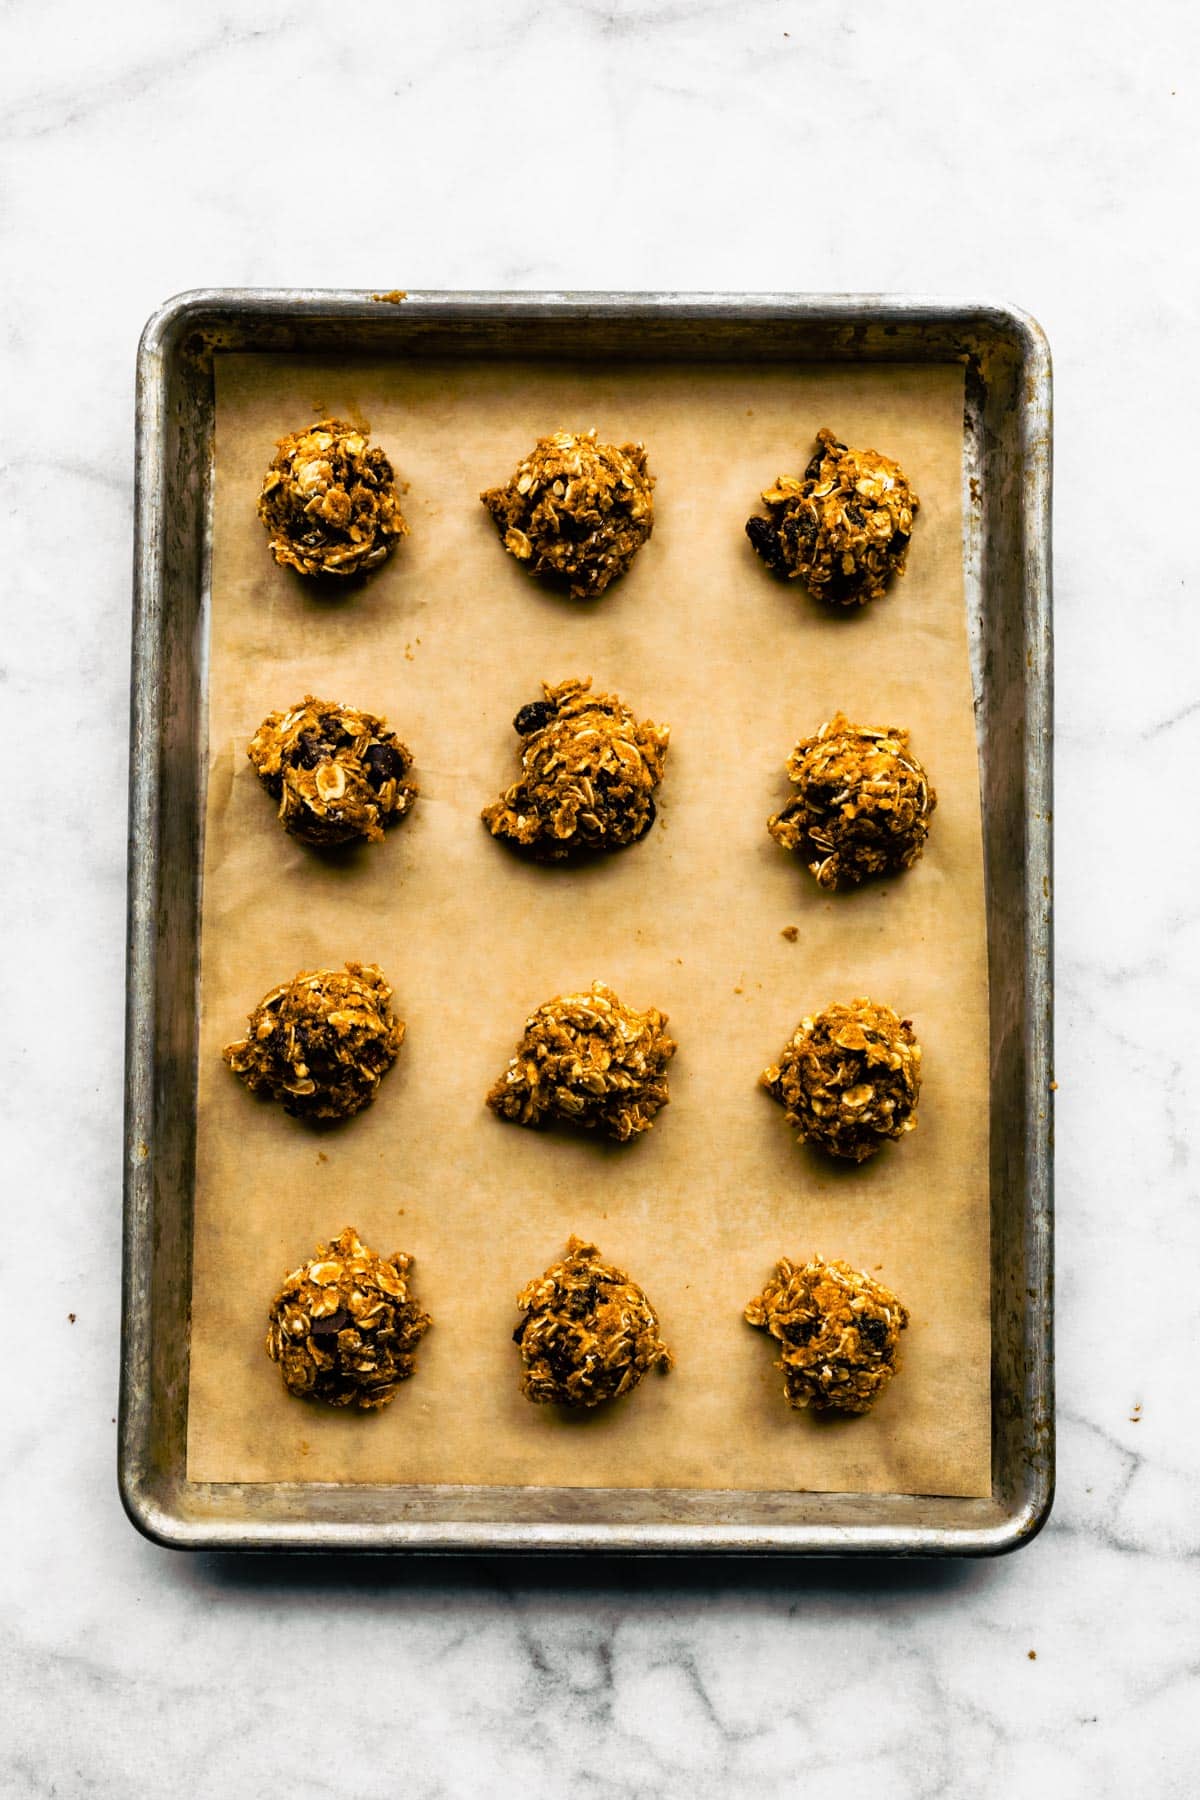 Twelve pieces of oatmeal cookie dough on parchment paper on a baking sheet.